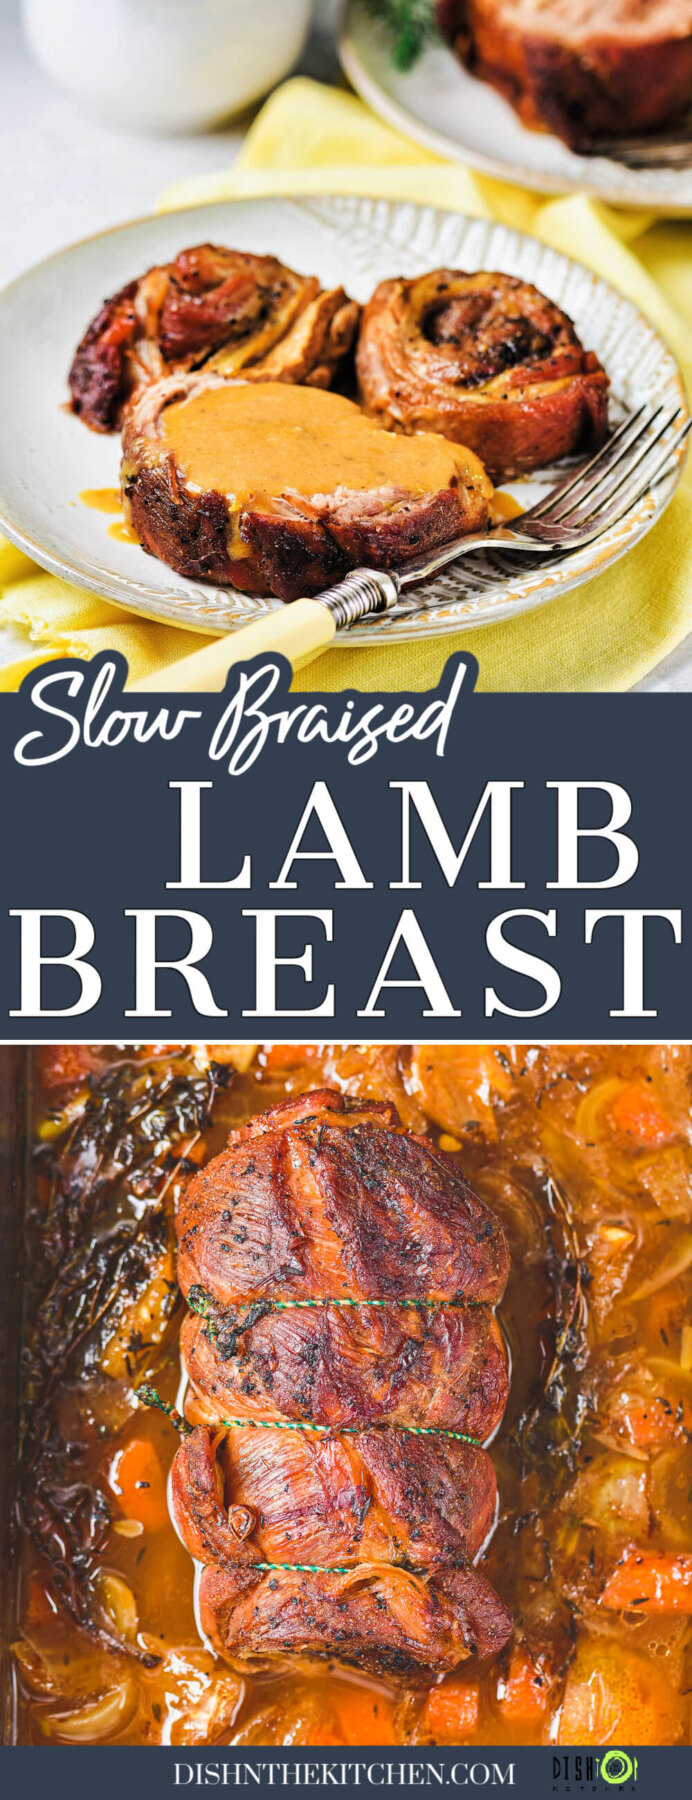 Pinterest image of a white plate containing three slices of braised lamb breast, one covered in gravy and a whole lamb breast roast in a roaster.